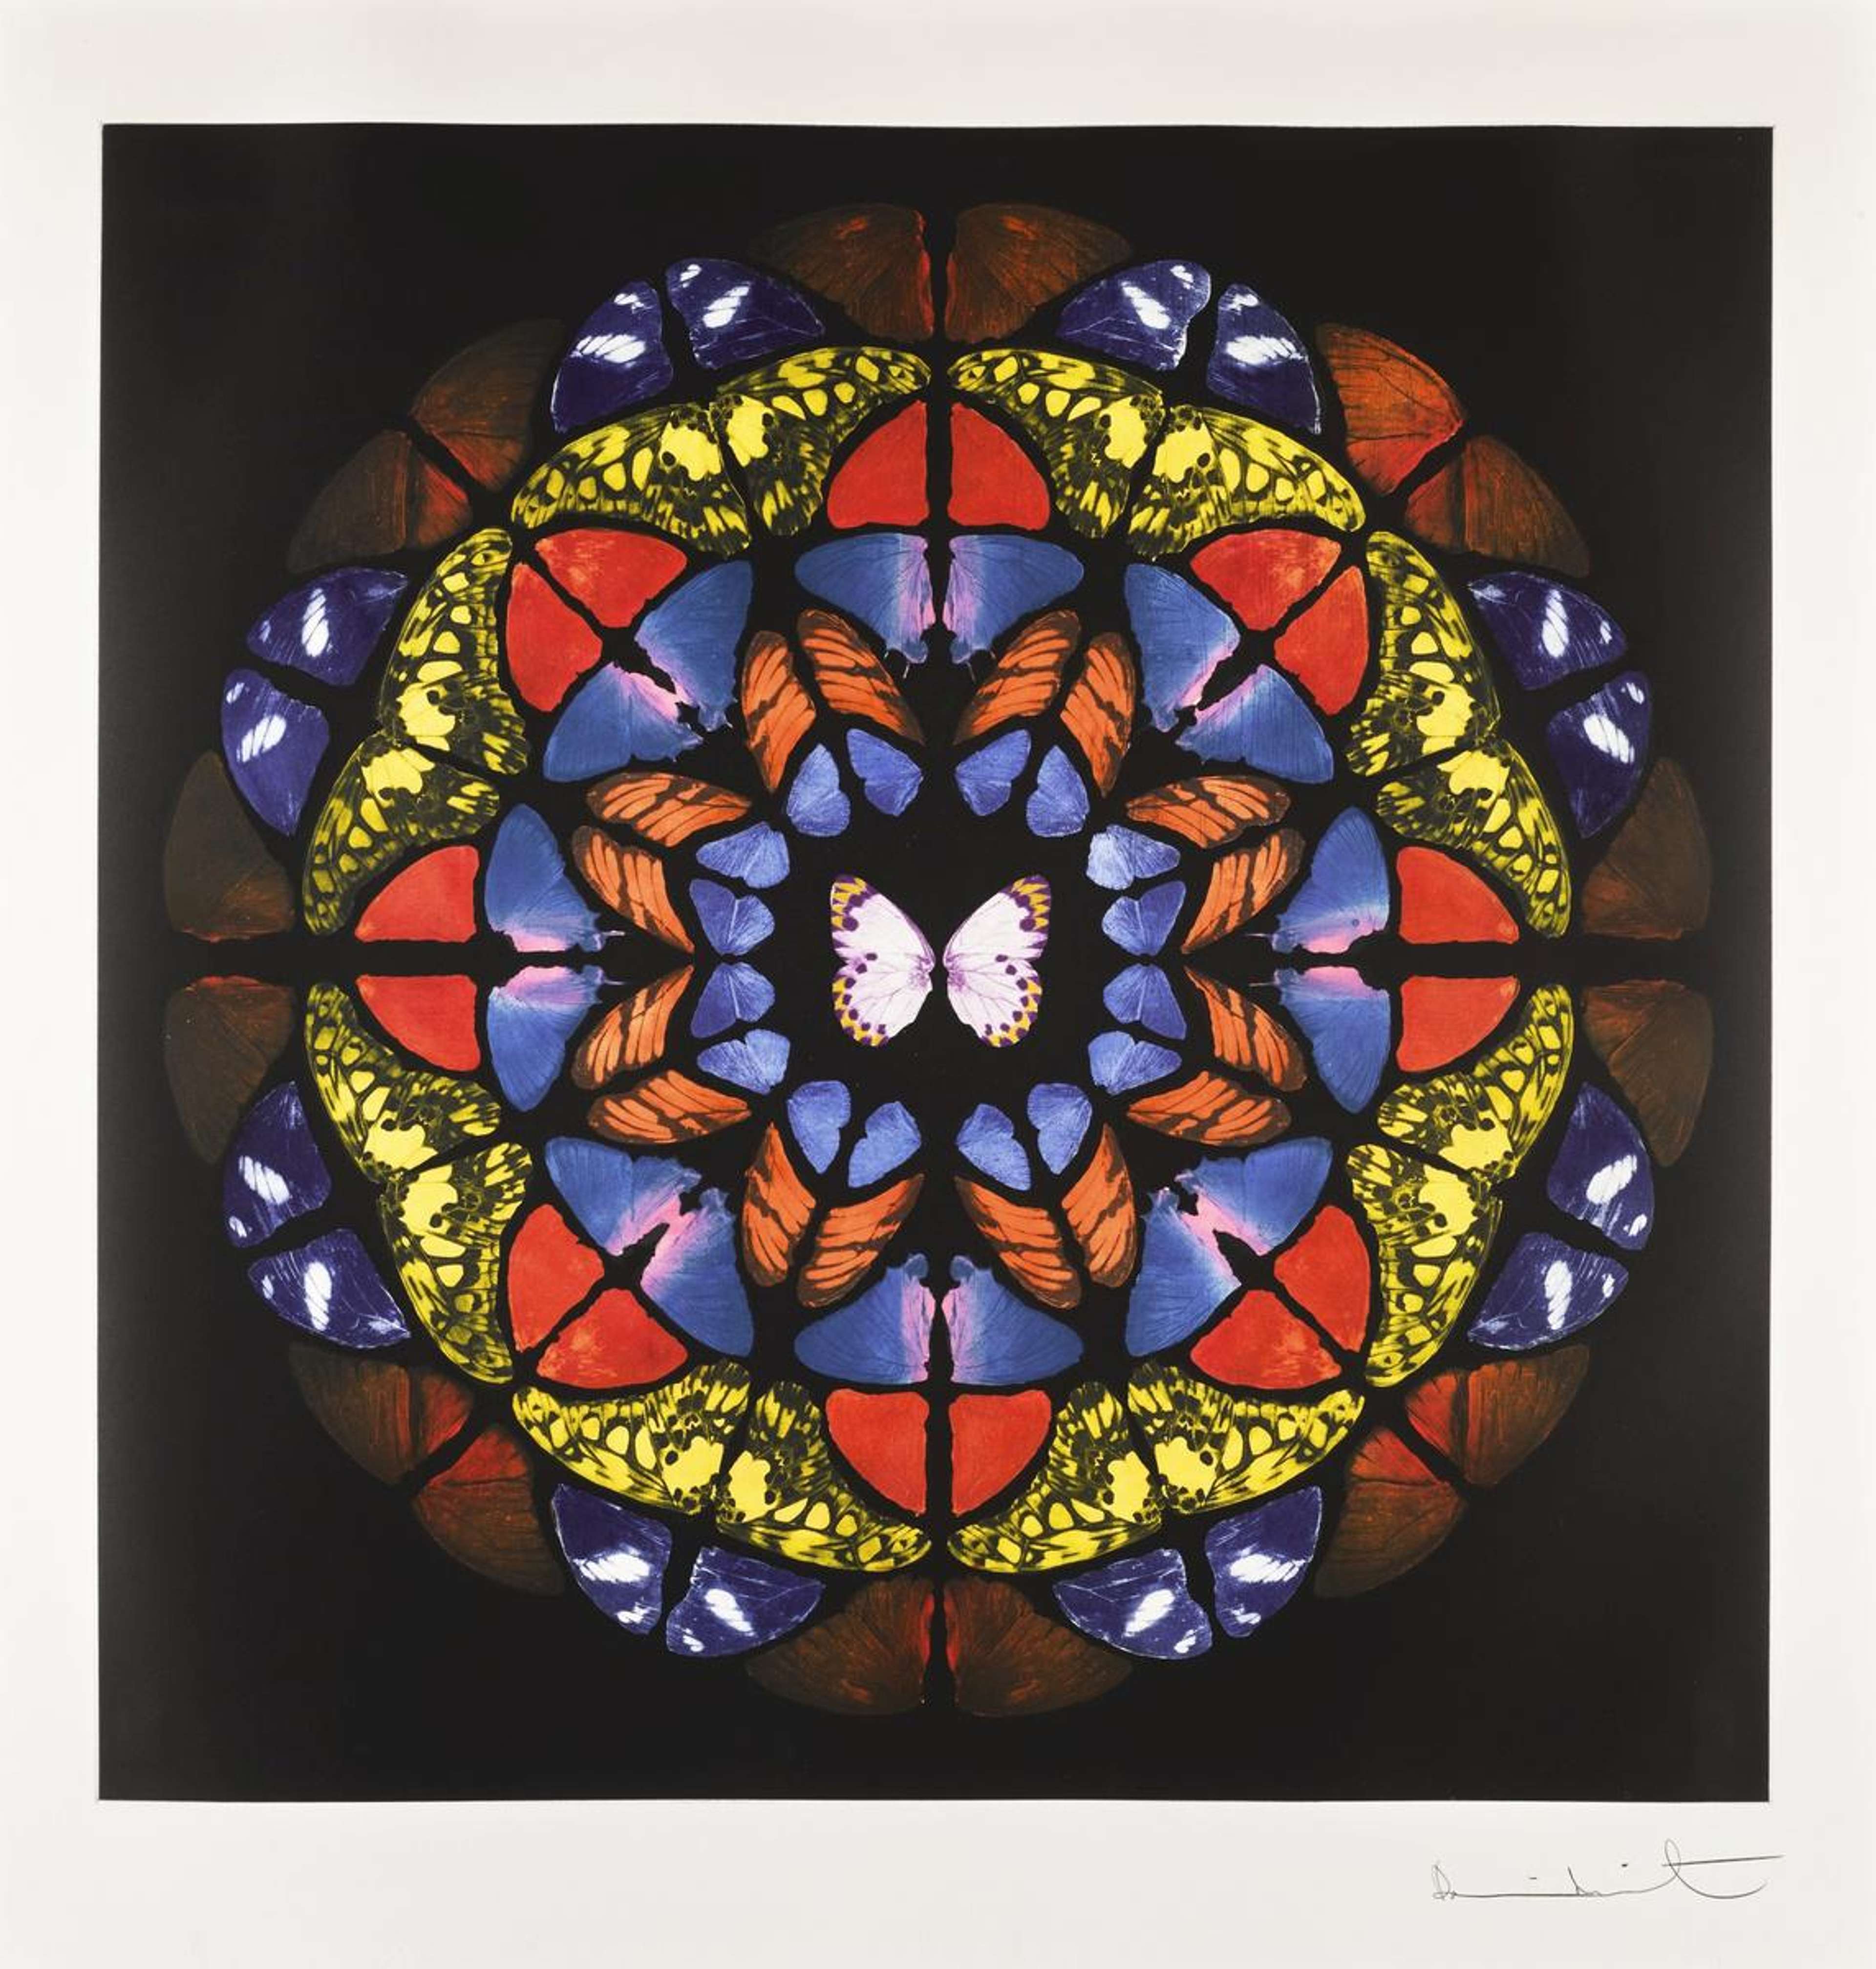 This print by Damien Hirst combines the splendour of a rose window with the symmetry of a kaleidoscope, rendered in red, blue, yellow, orange and black. 